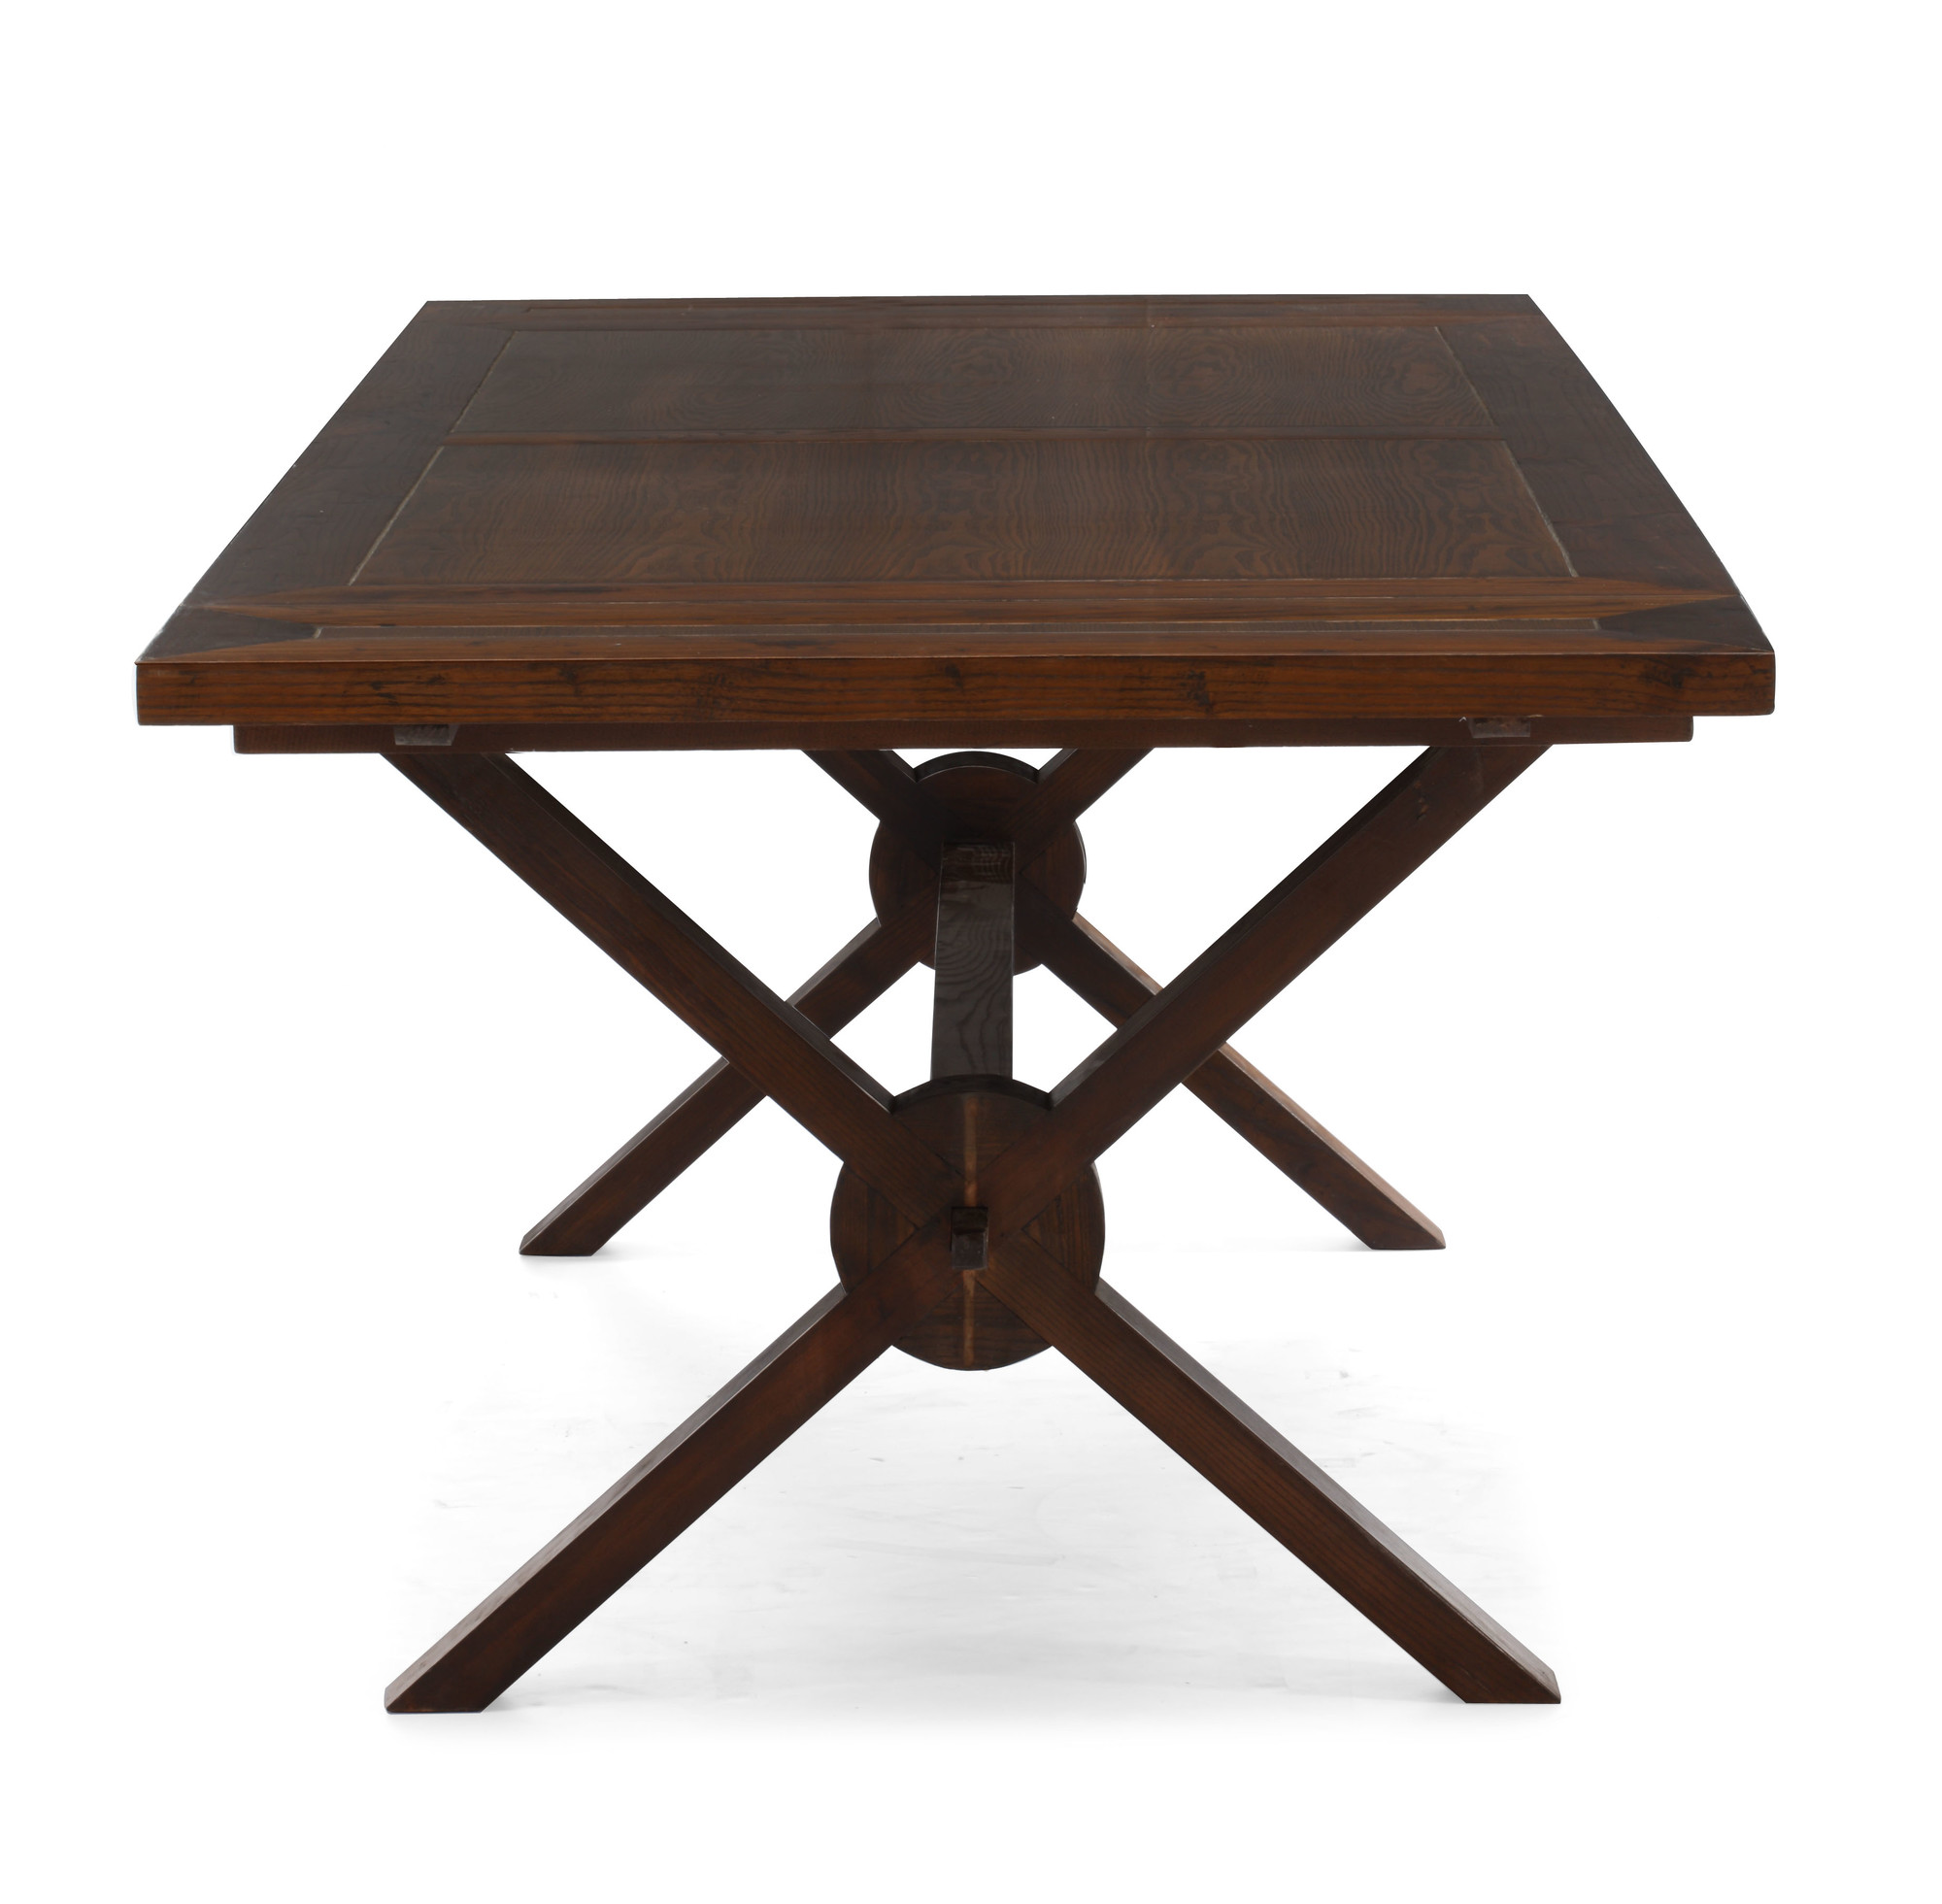 laurel-heights-table-by-zuo.jpg